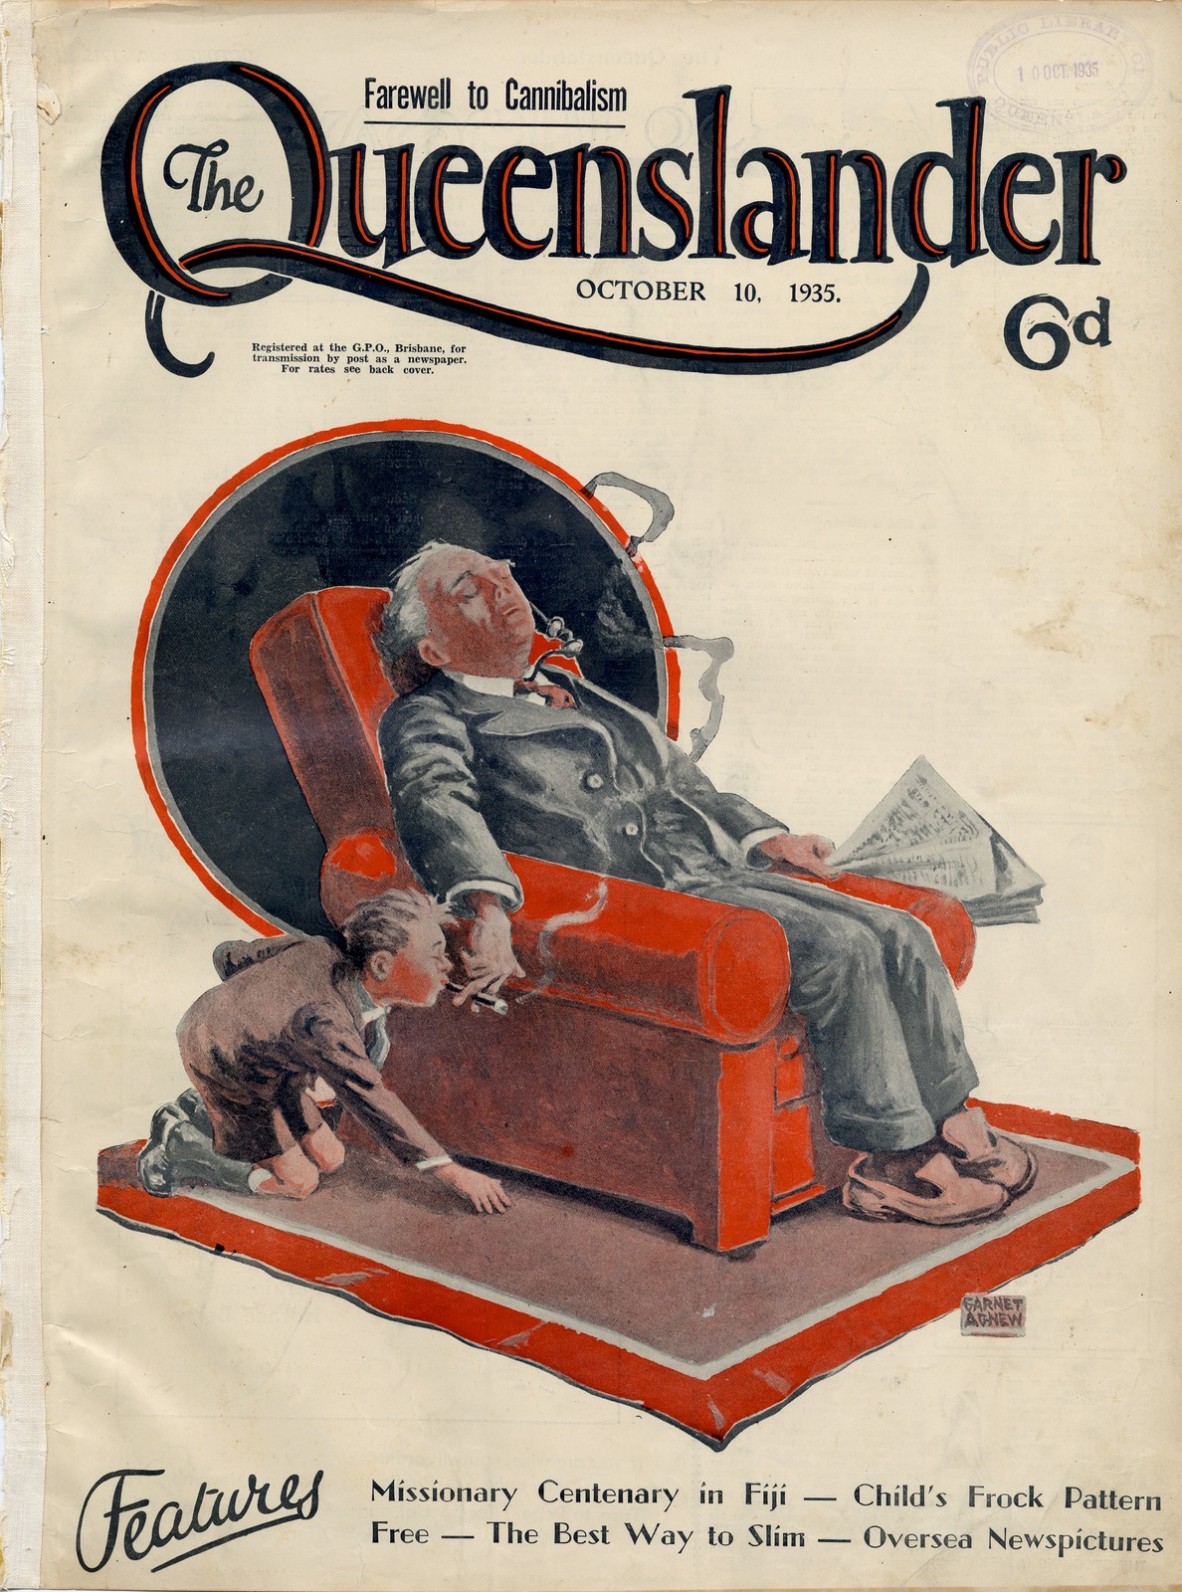 Illustrated front cover from The Queenslander October 10 1935